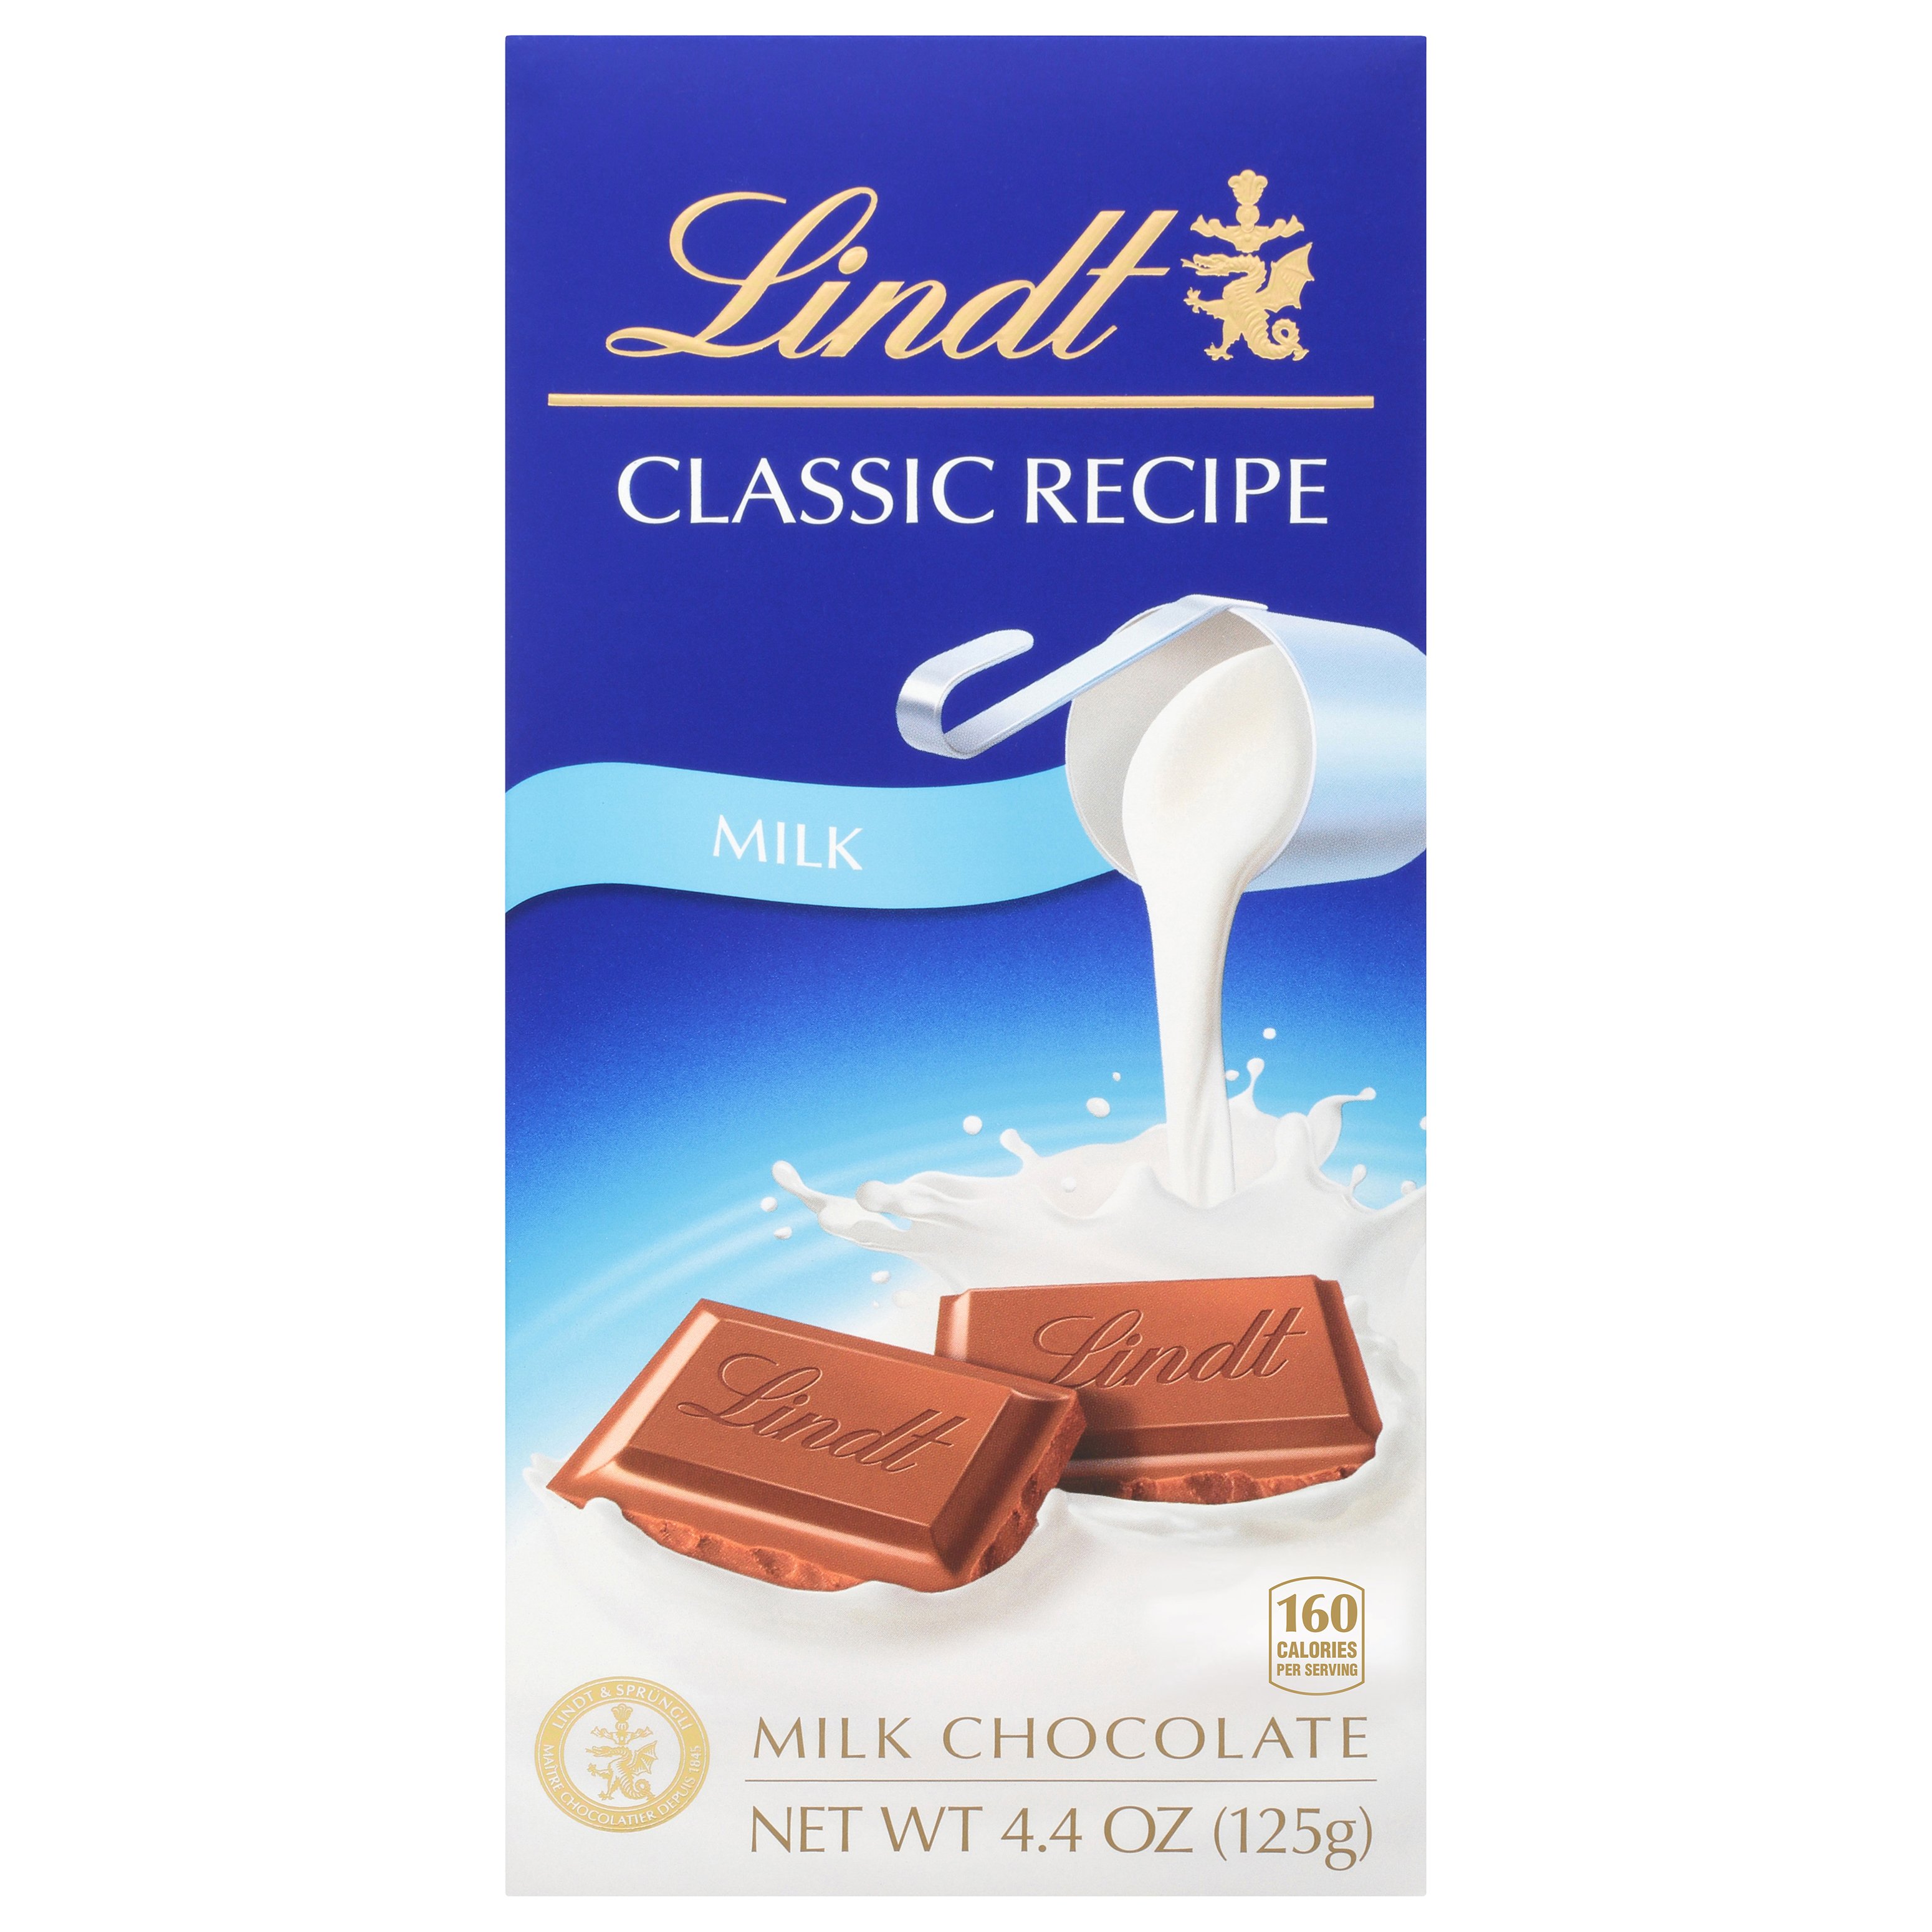 Lindt Lindor Assorted Chocolate Truffles - Shop Candy at H-E-B